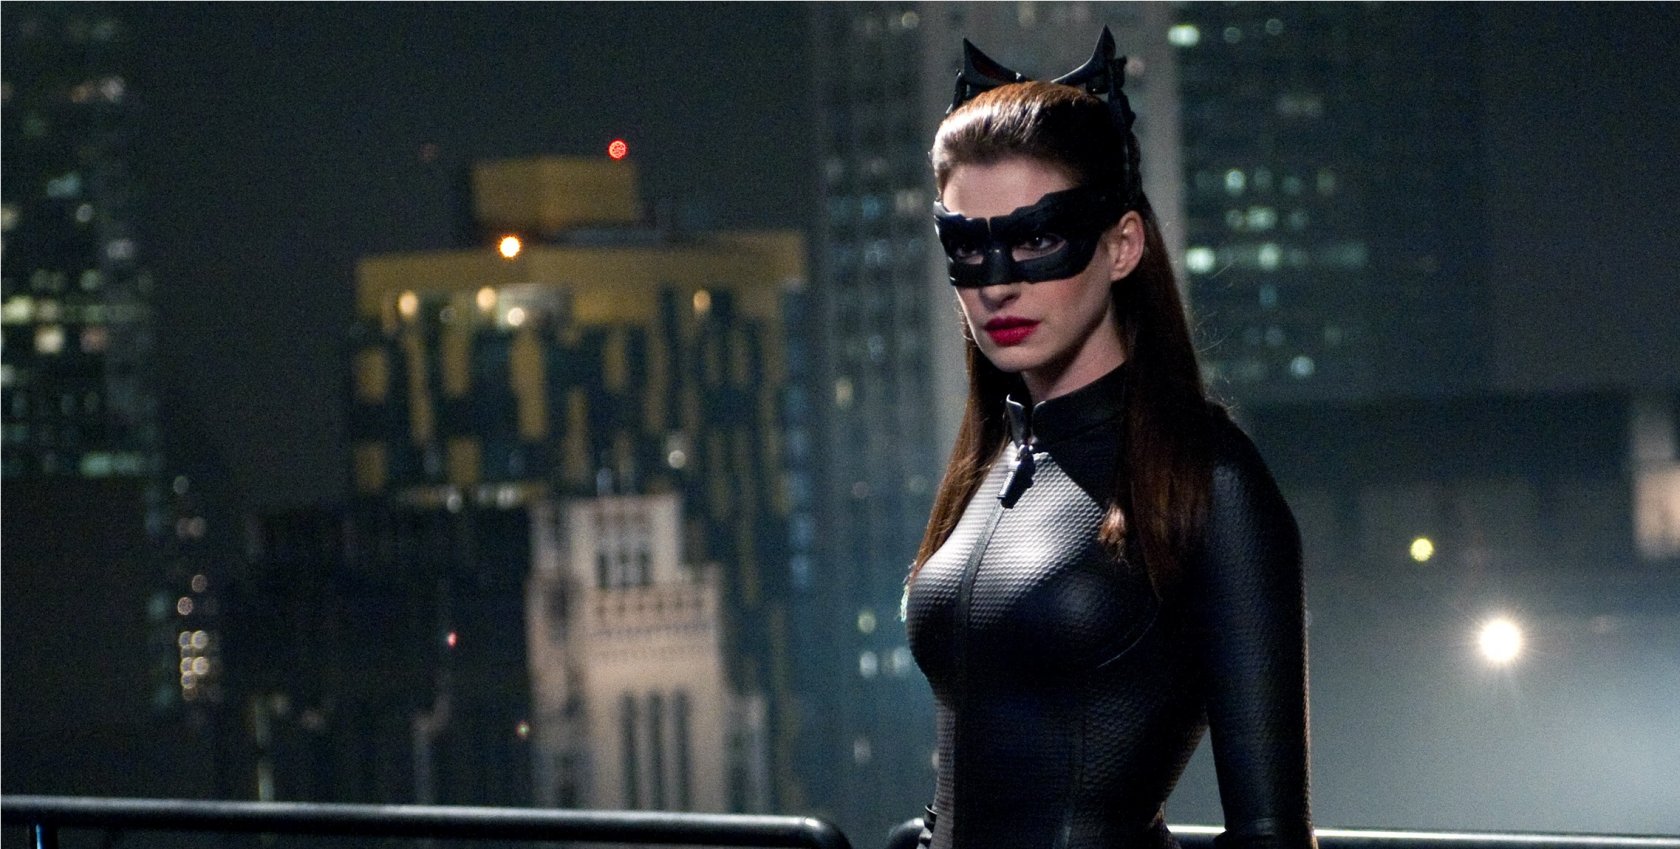 Catwoman touching herself free porn pictures